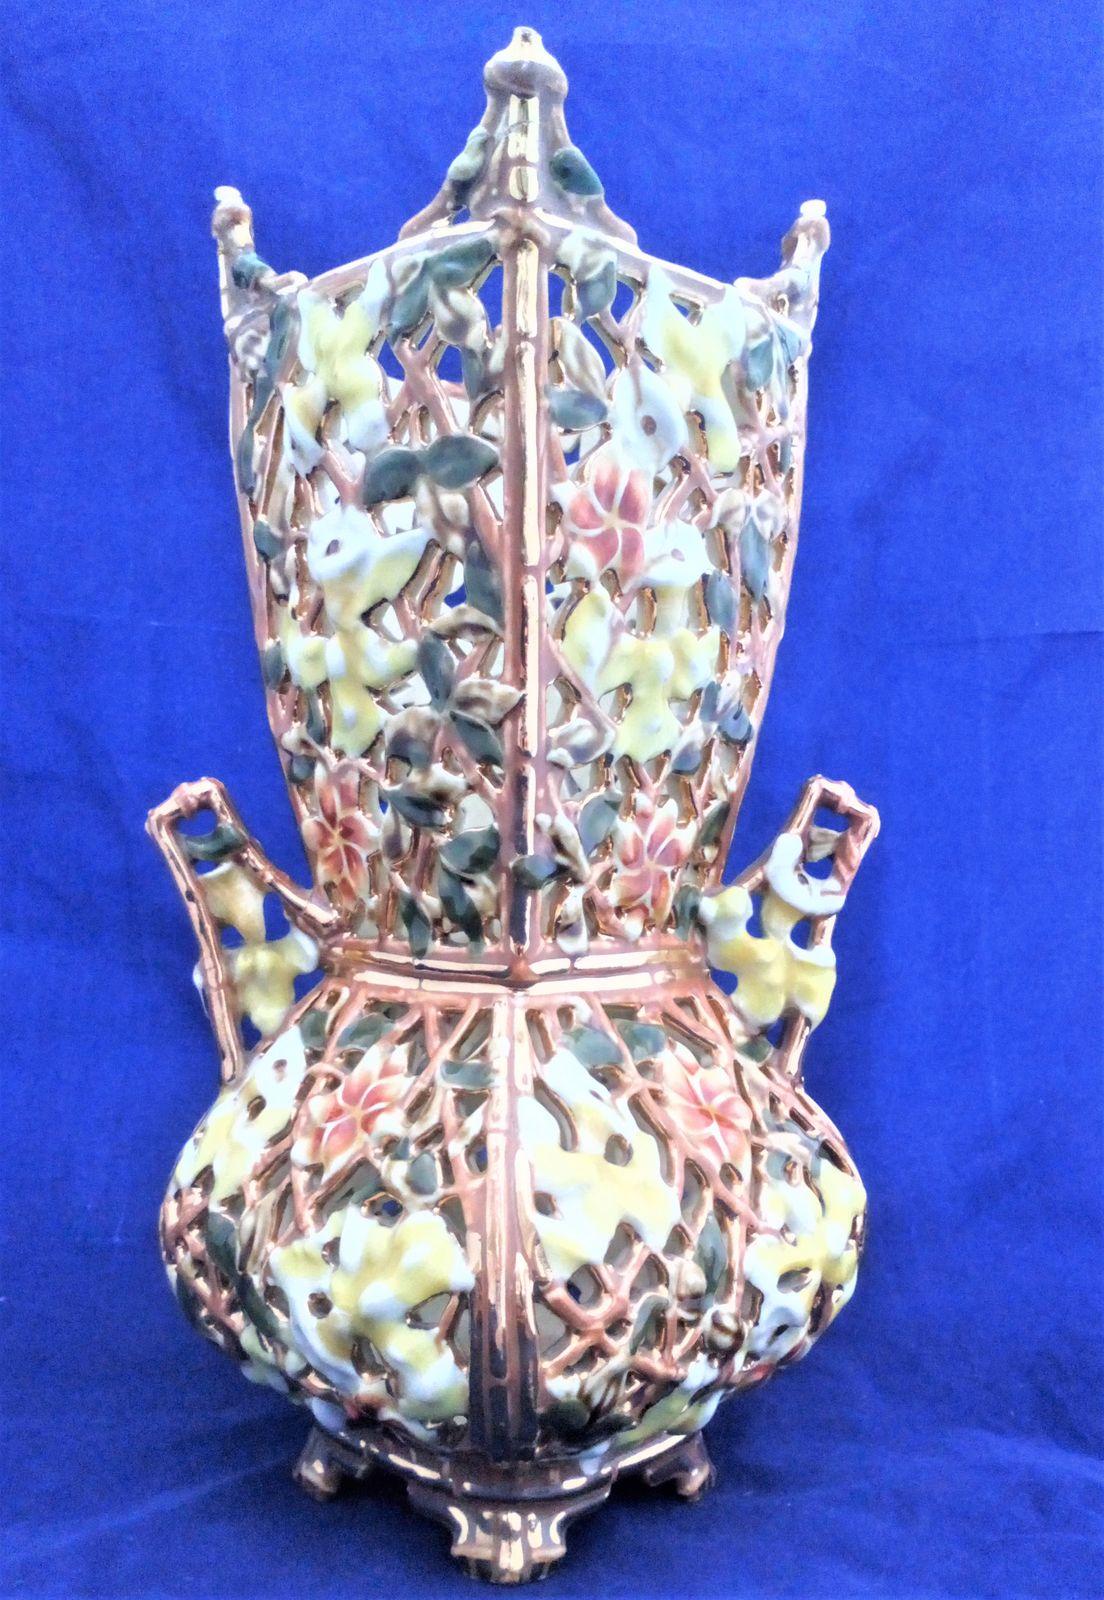 An antique Zsolnay Pecs Square Reticulated Vase Shape 3695 decorated with orchids and flowers circa 1895 Austria Hungarian